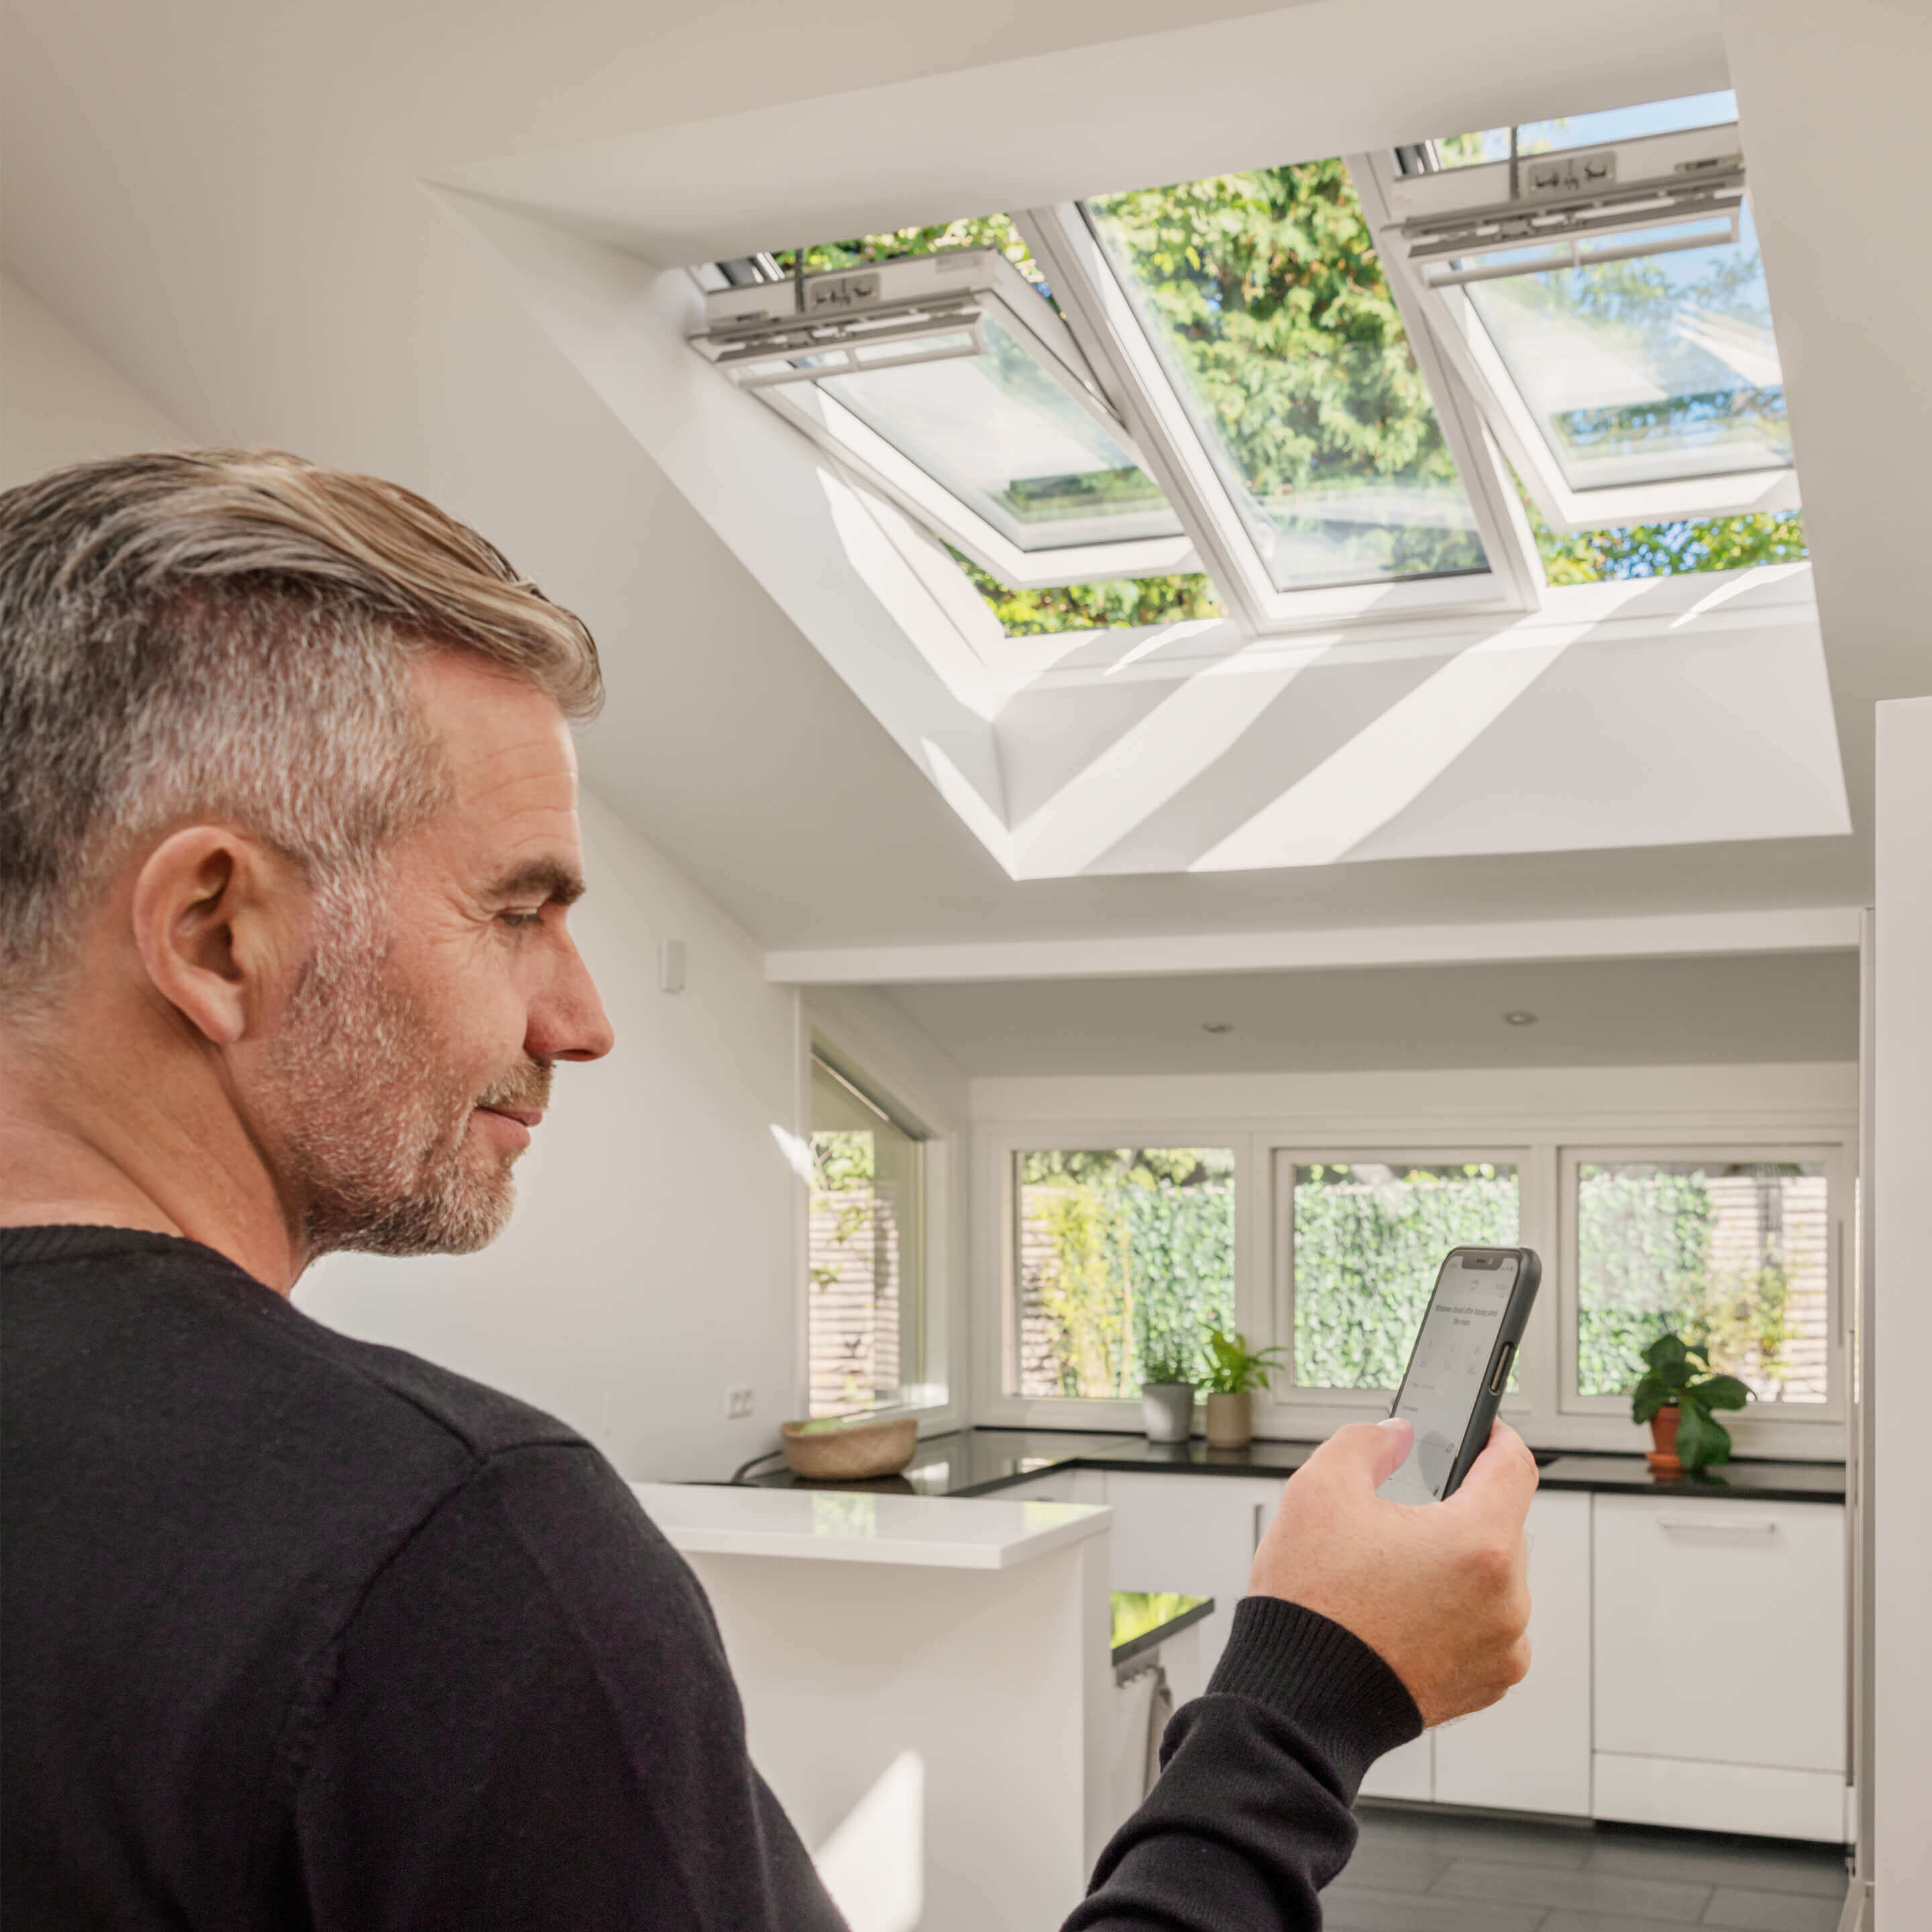 person holding a smart phone with screen showing application for controlling VELUX electric products